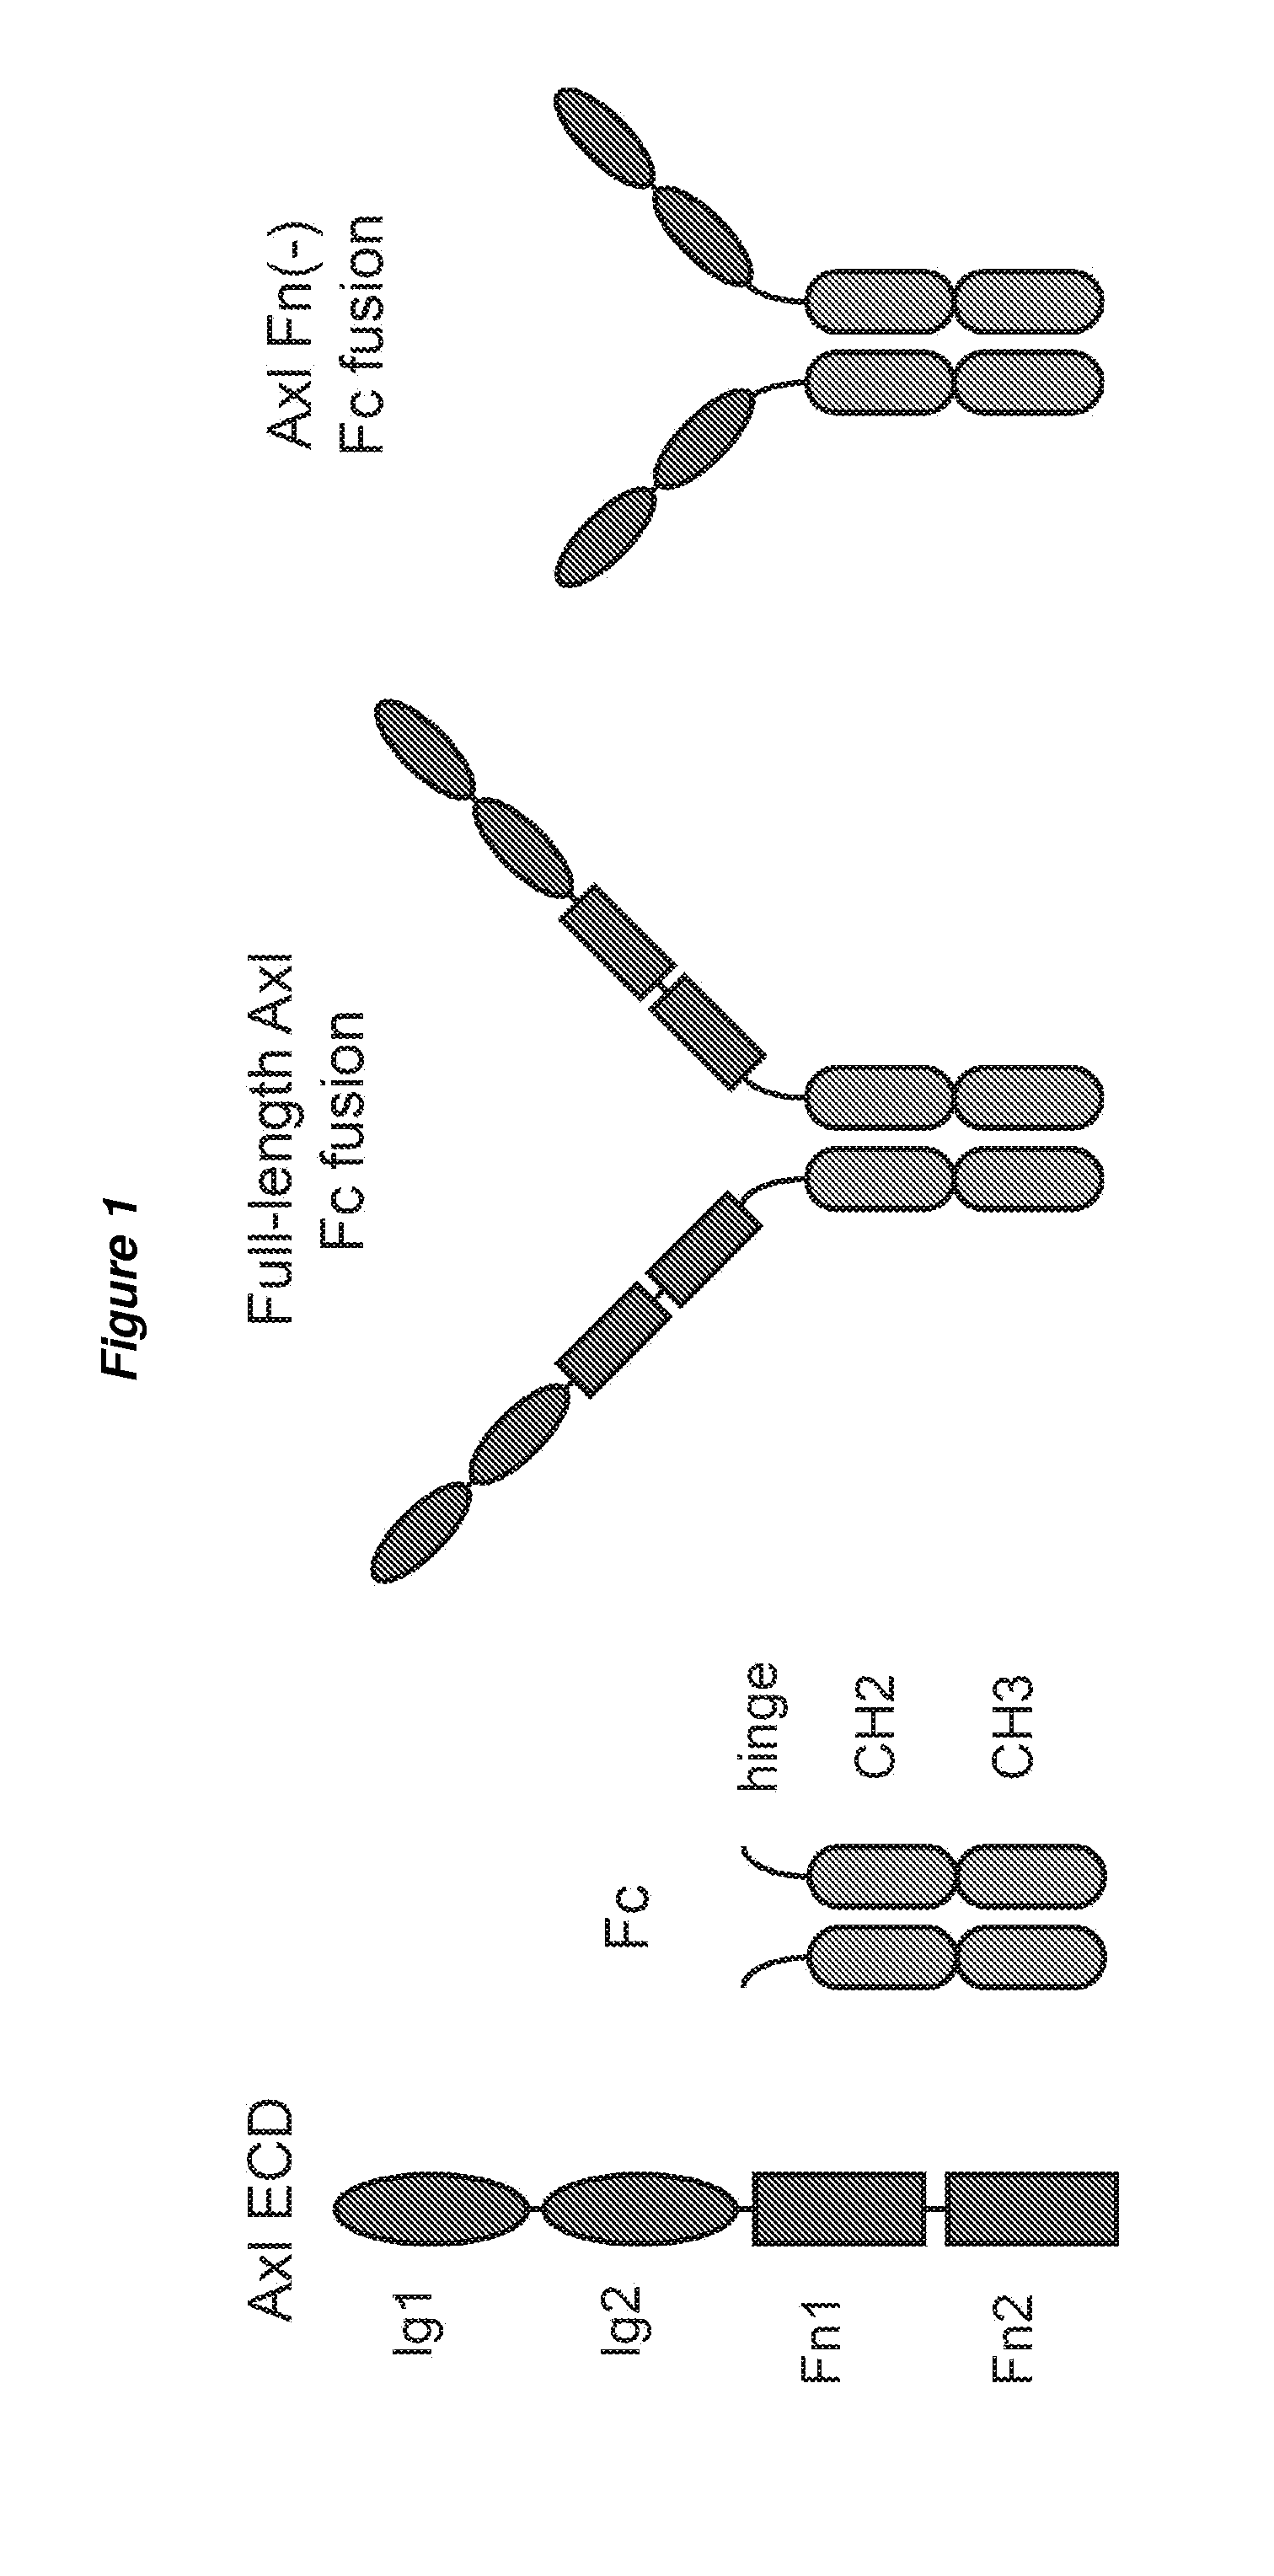 Modified AXL Peptides and Their Use in Inhibition of AXL Signaling in Anti-Metastatic Therapy